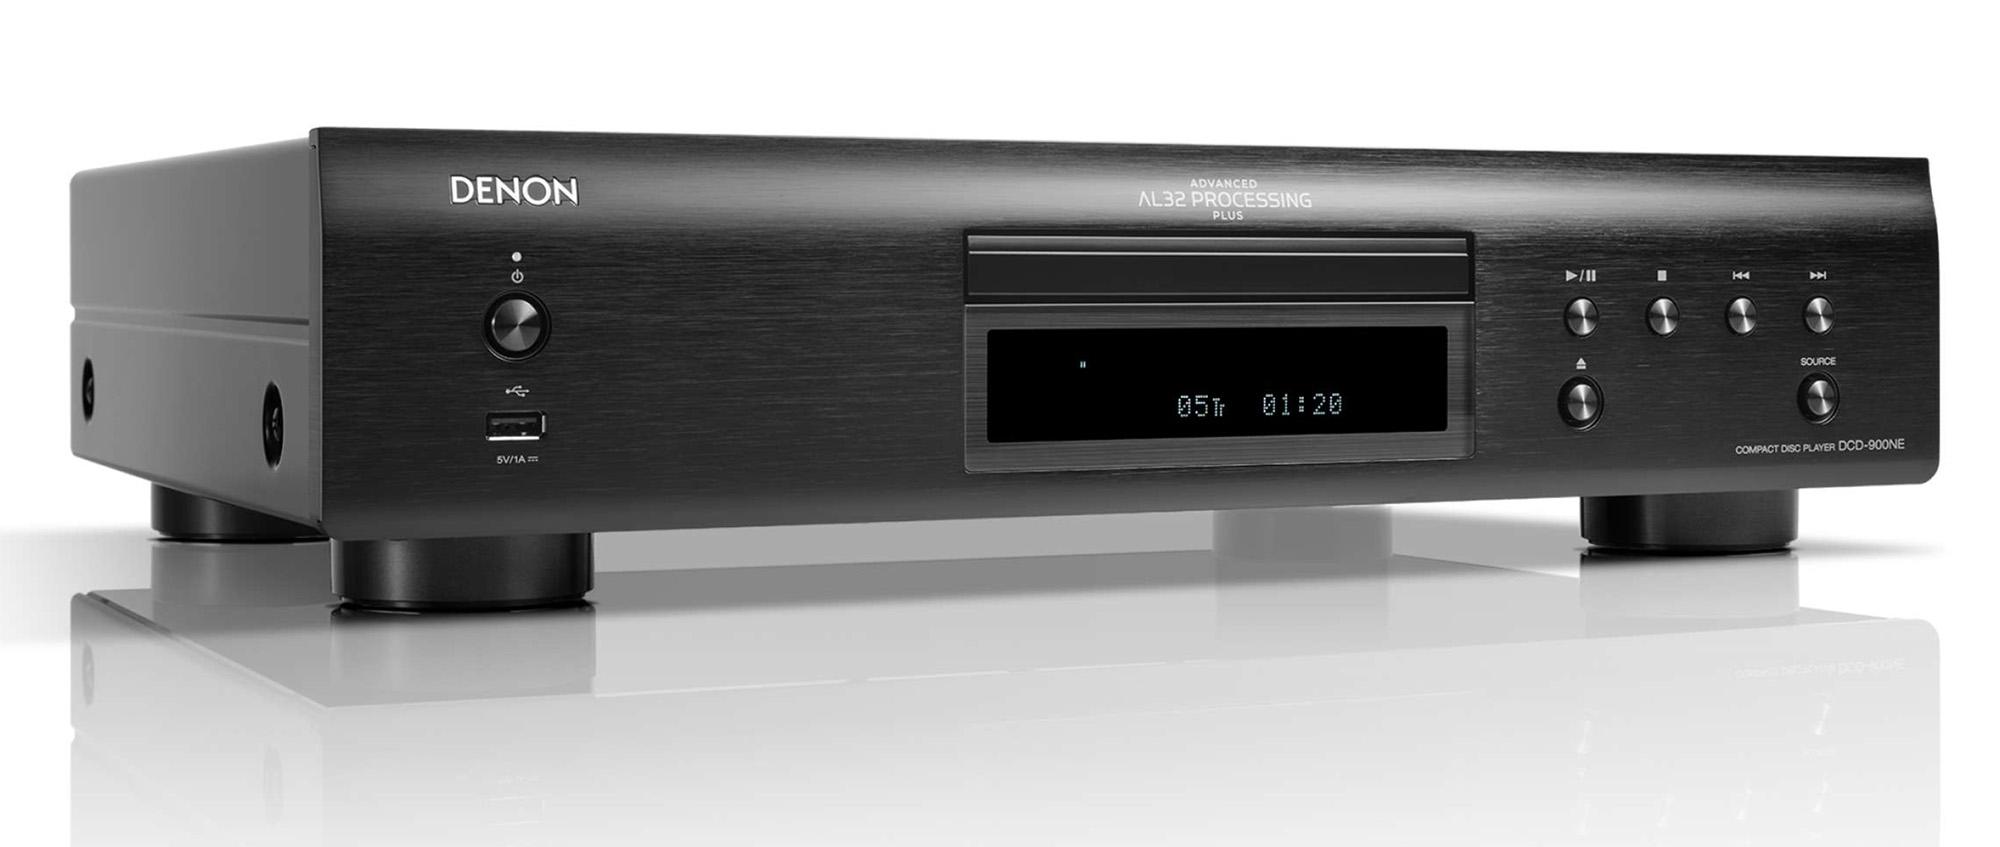 Are we on the cusp of a CD renaissance? Two new players for album lovers. 52d482d7 denon dcd900ne